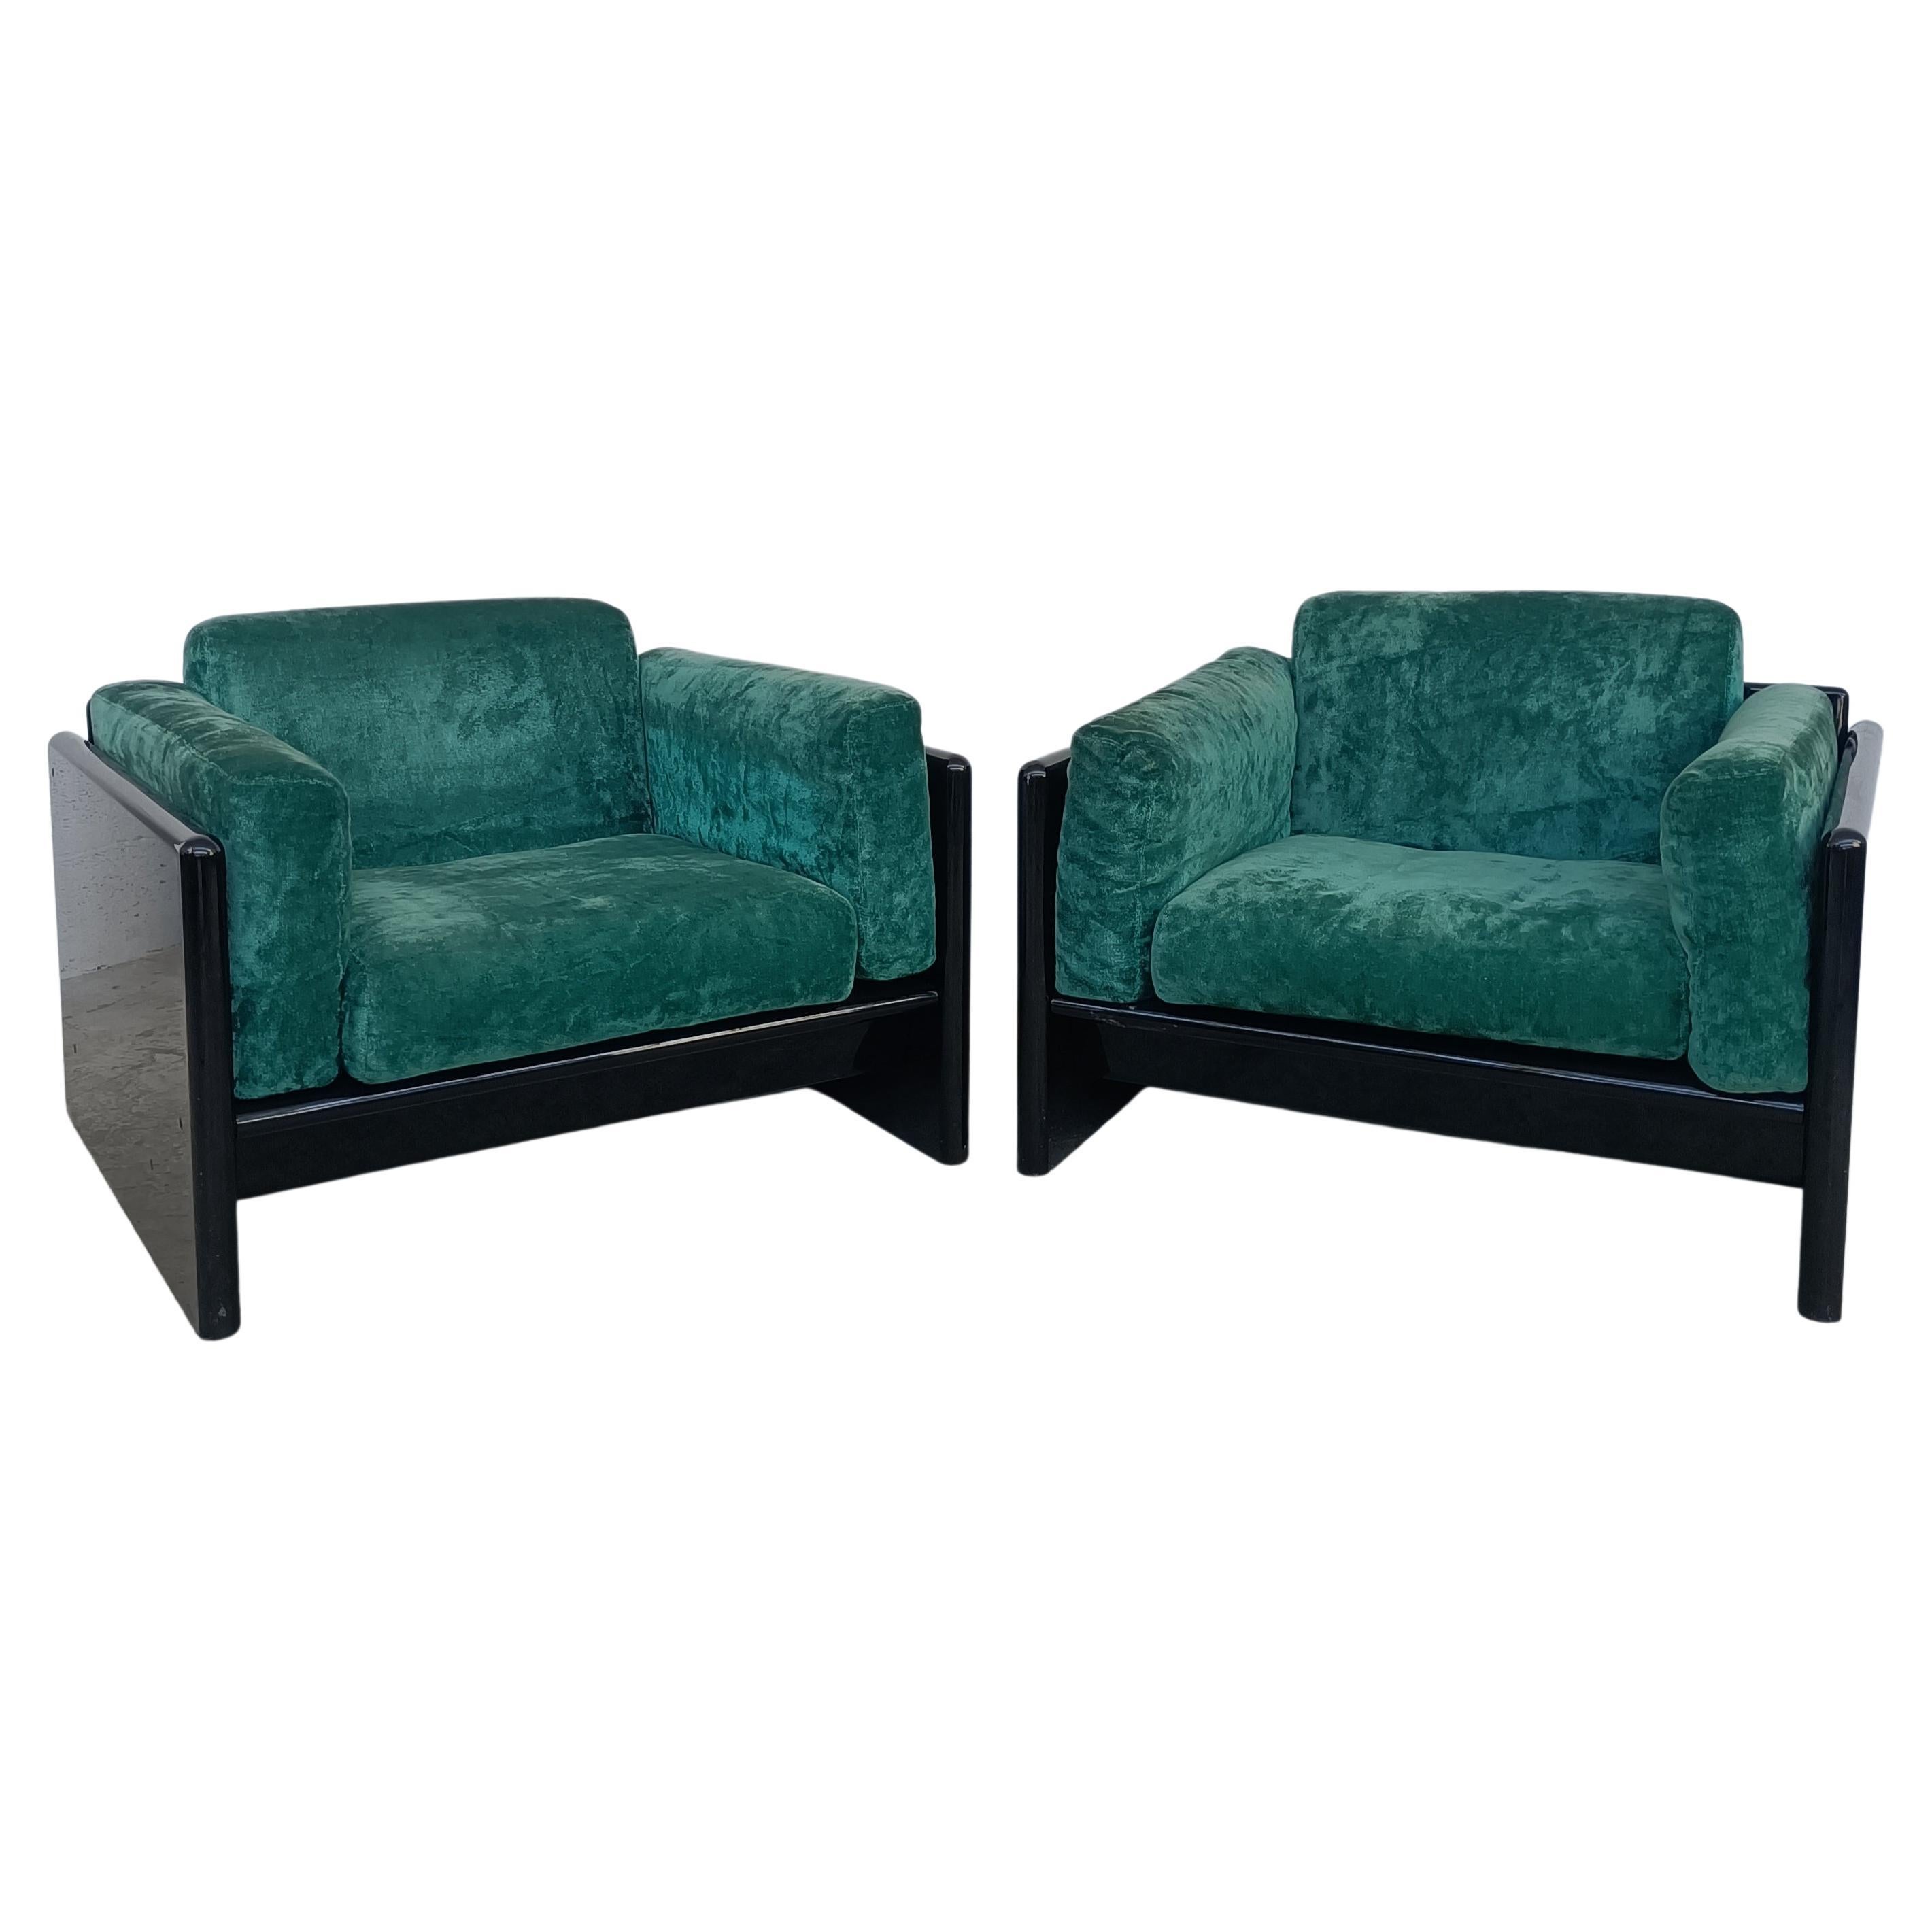 2 Lacquered and Green Velvet Simone Armchairs by Dino Gavina for Simon 70s